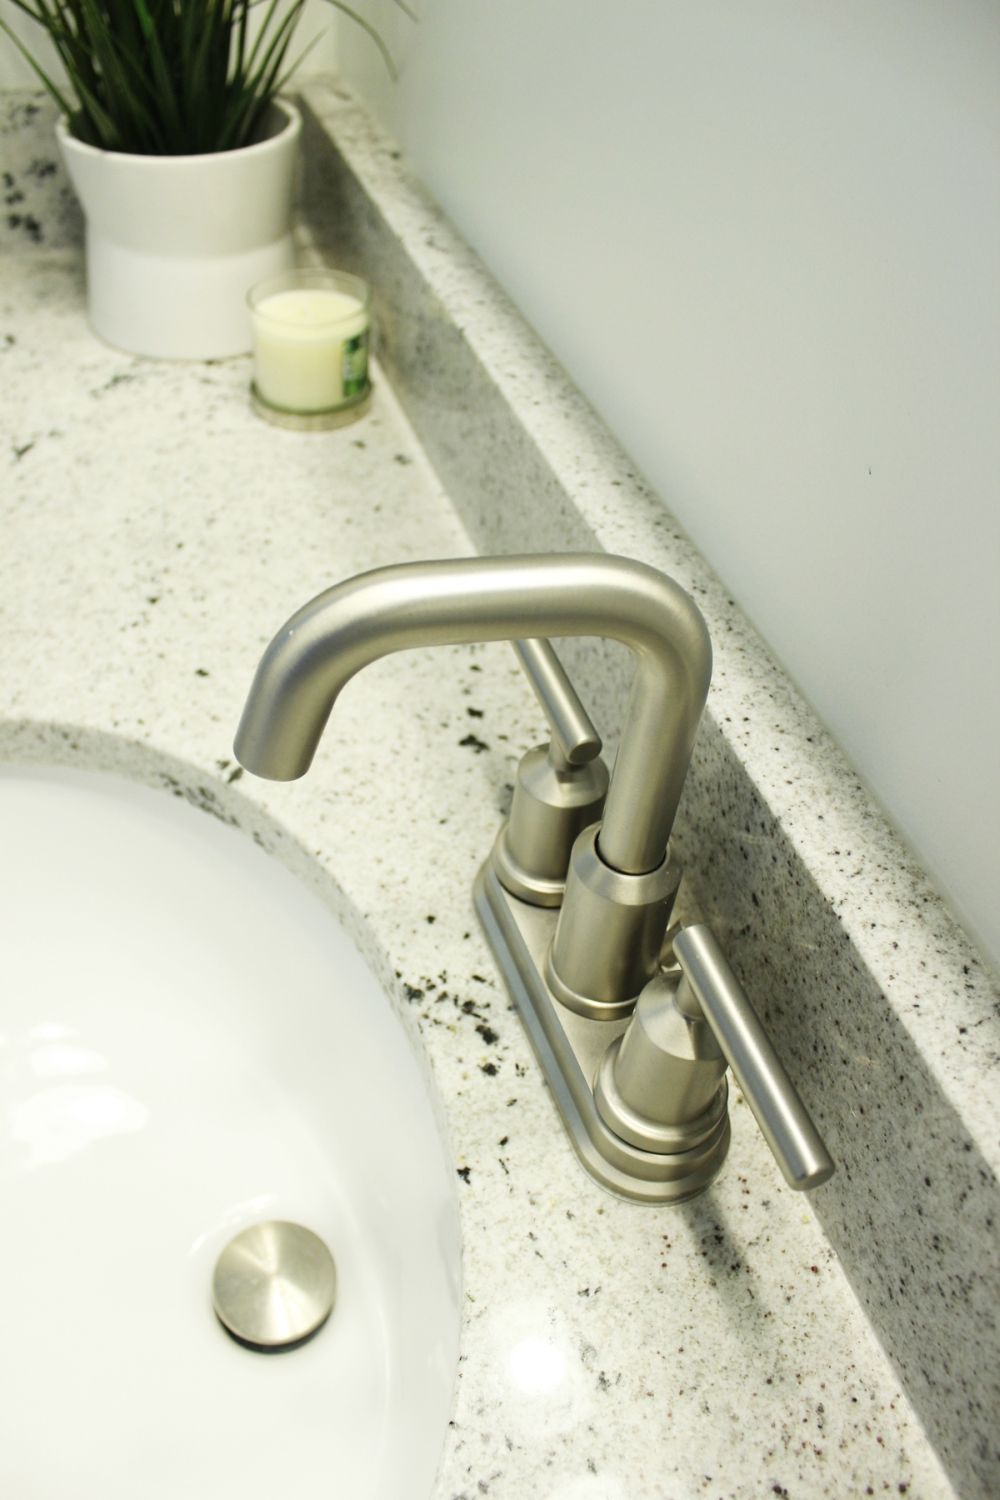 Choosing the right faucet for the bathroom sink